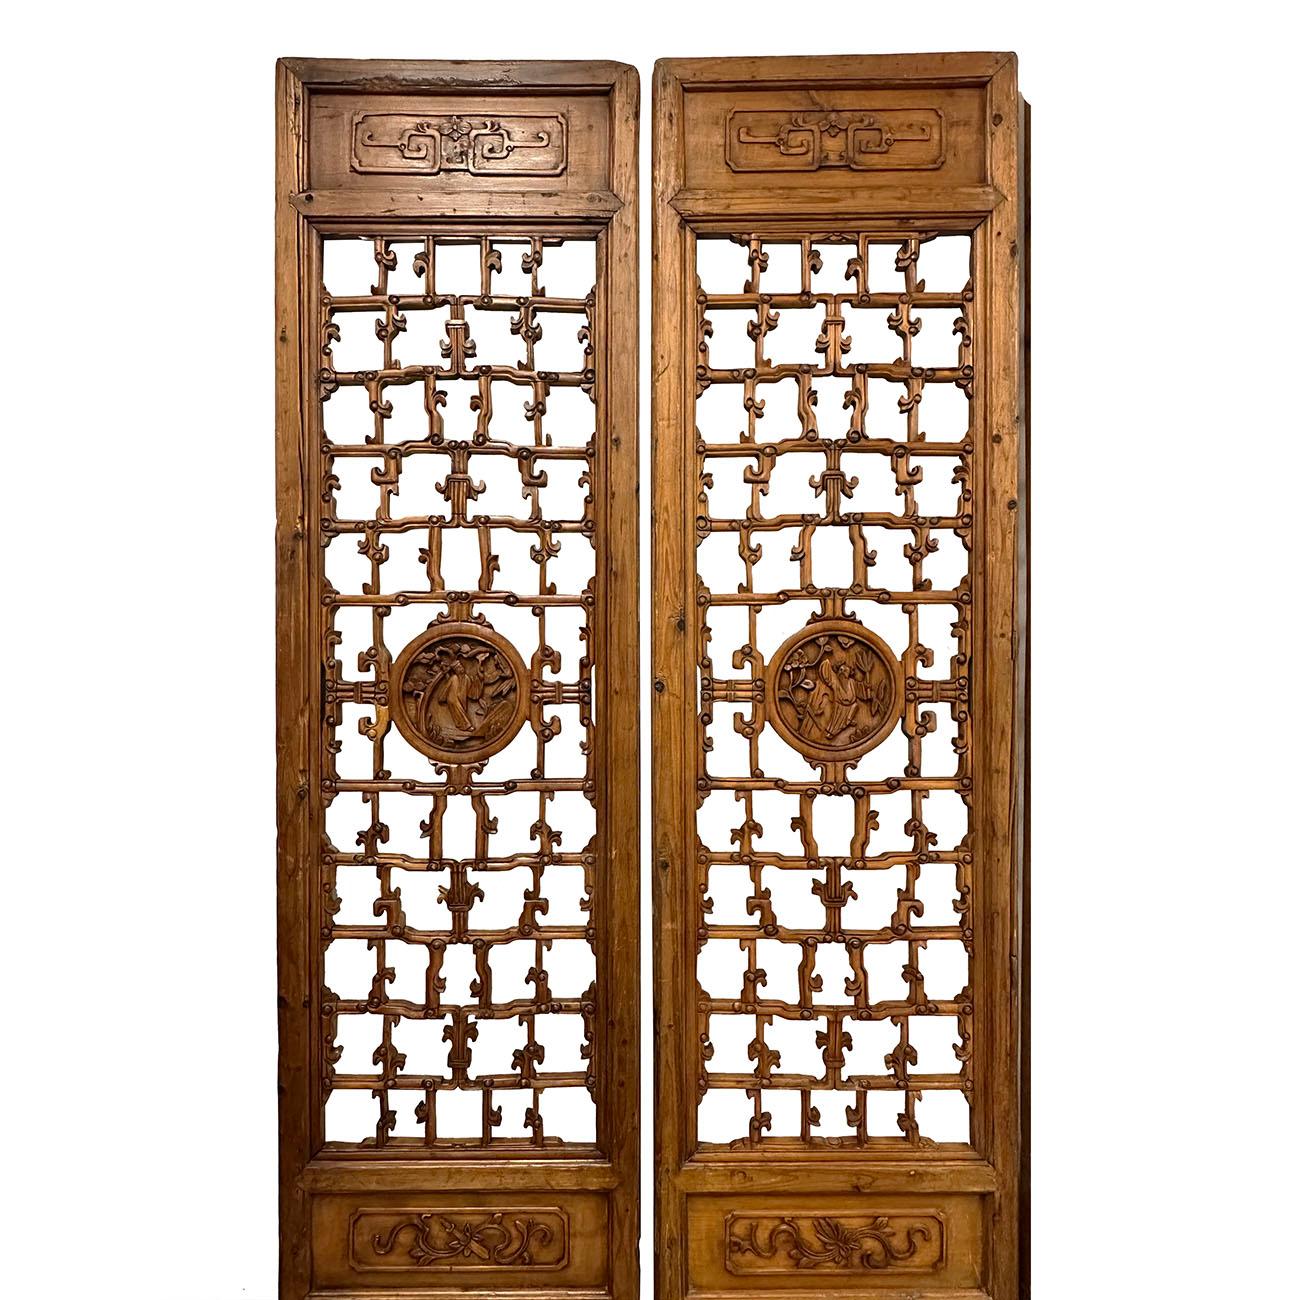 A set of six Chinese Qing Dynasty period large carved wood interior door panels from the late 19th century, with fretwork design, Created in China during the Qing Dynasty in the later years of the 19th century, each of this set of six of large